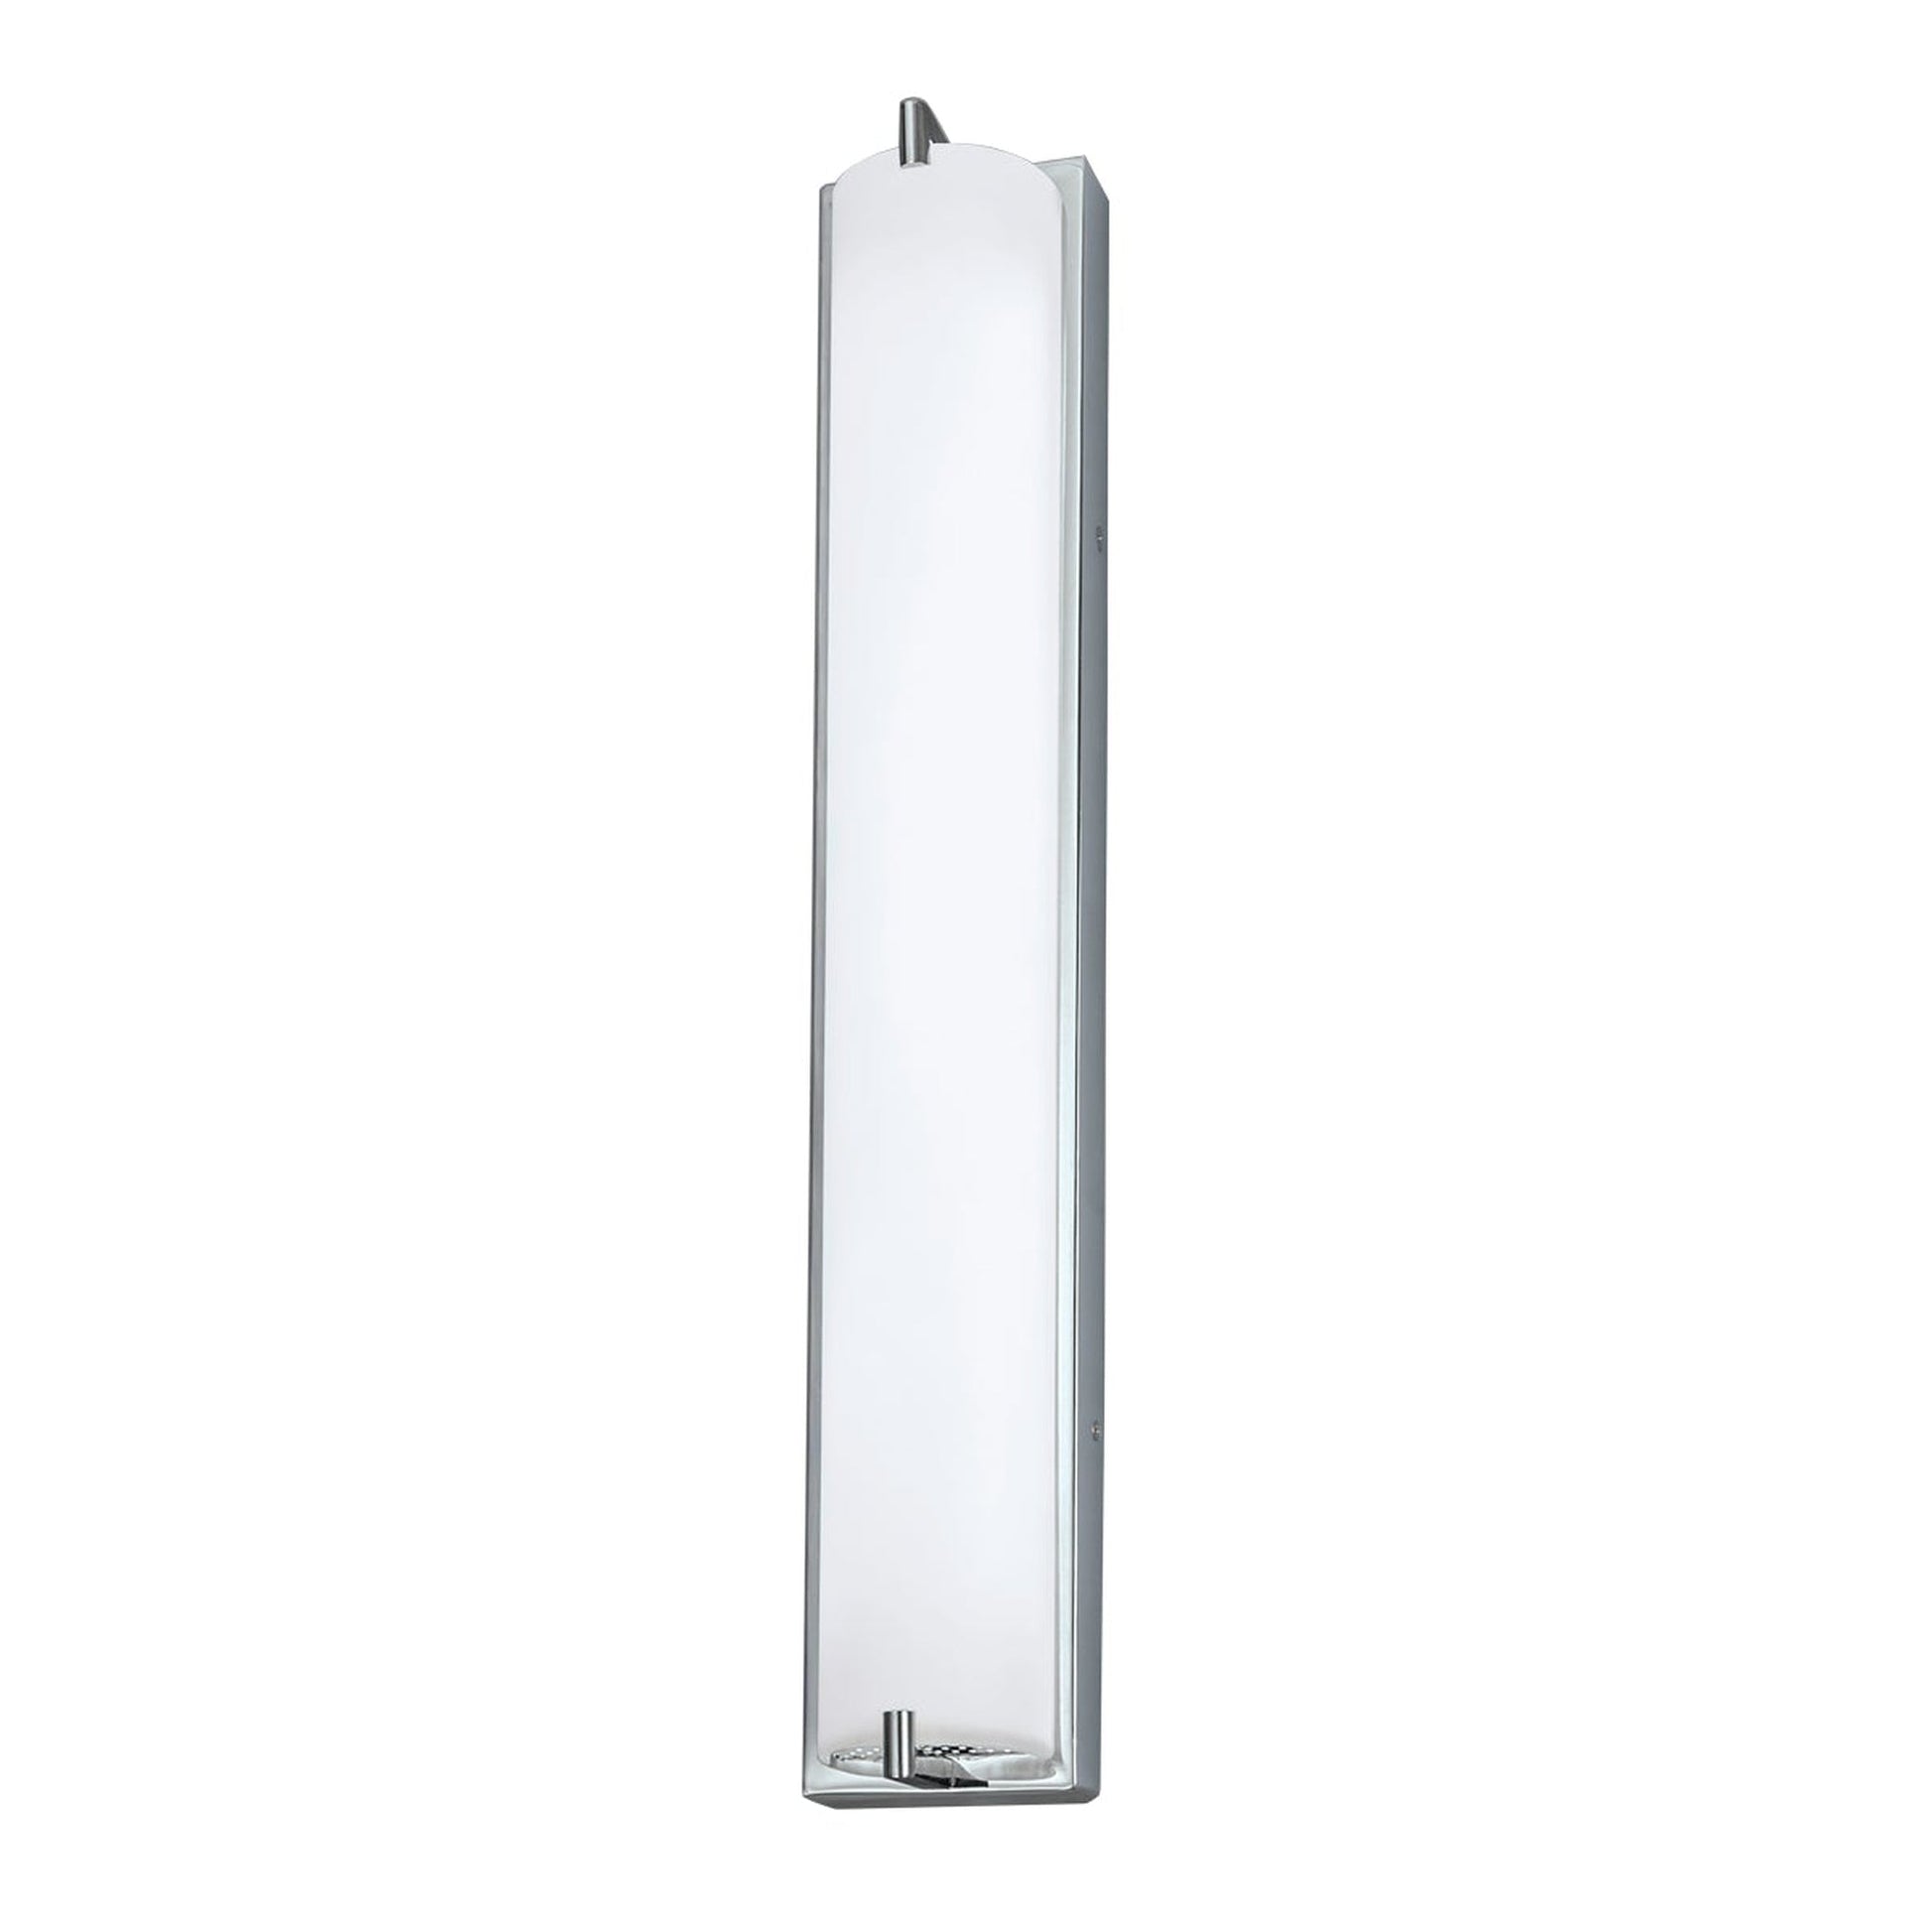 Norwell Lighting Alto 24" Chrome LED ADA Sconce With Matte Opal Glass Diffuser